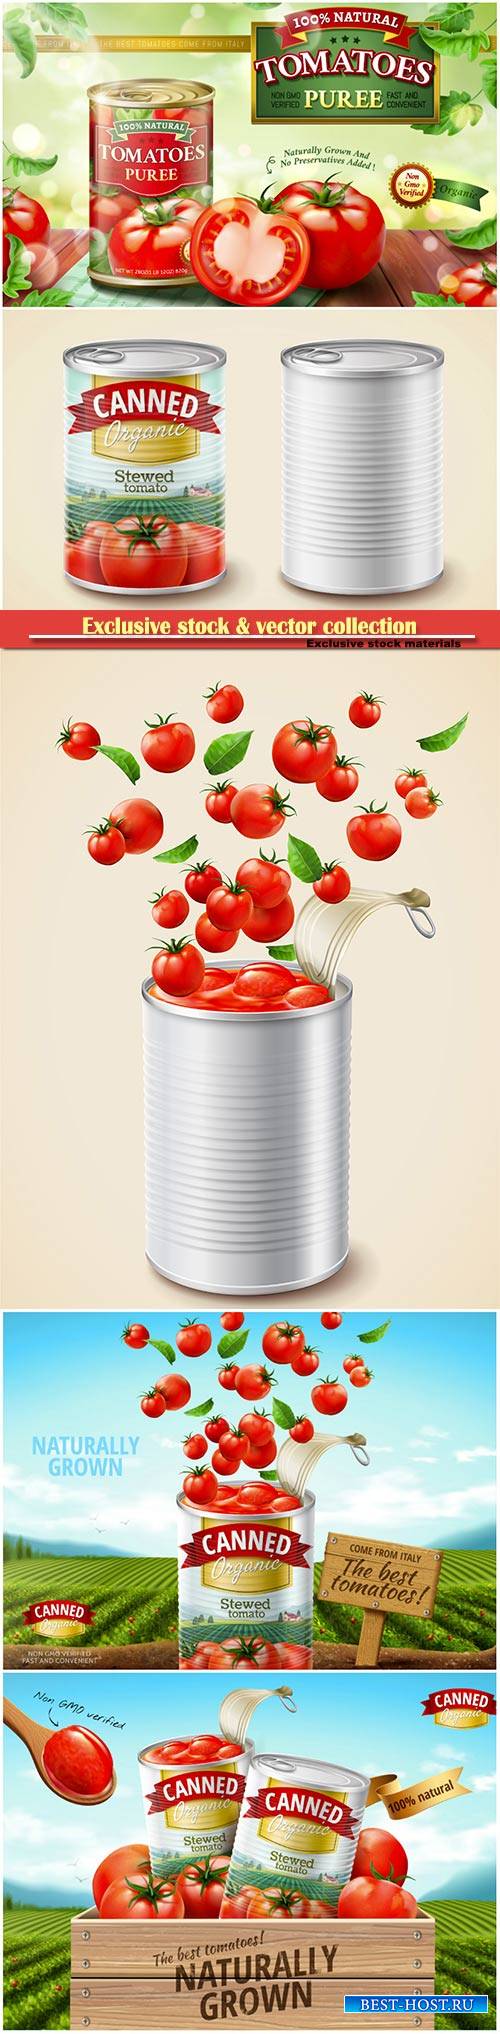 Canned tomato puree ads with fresh vegetables in 3d illustration